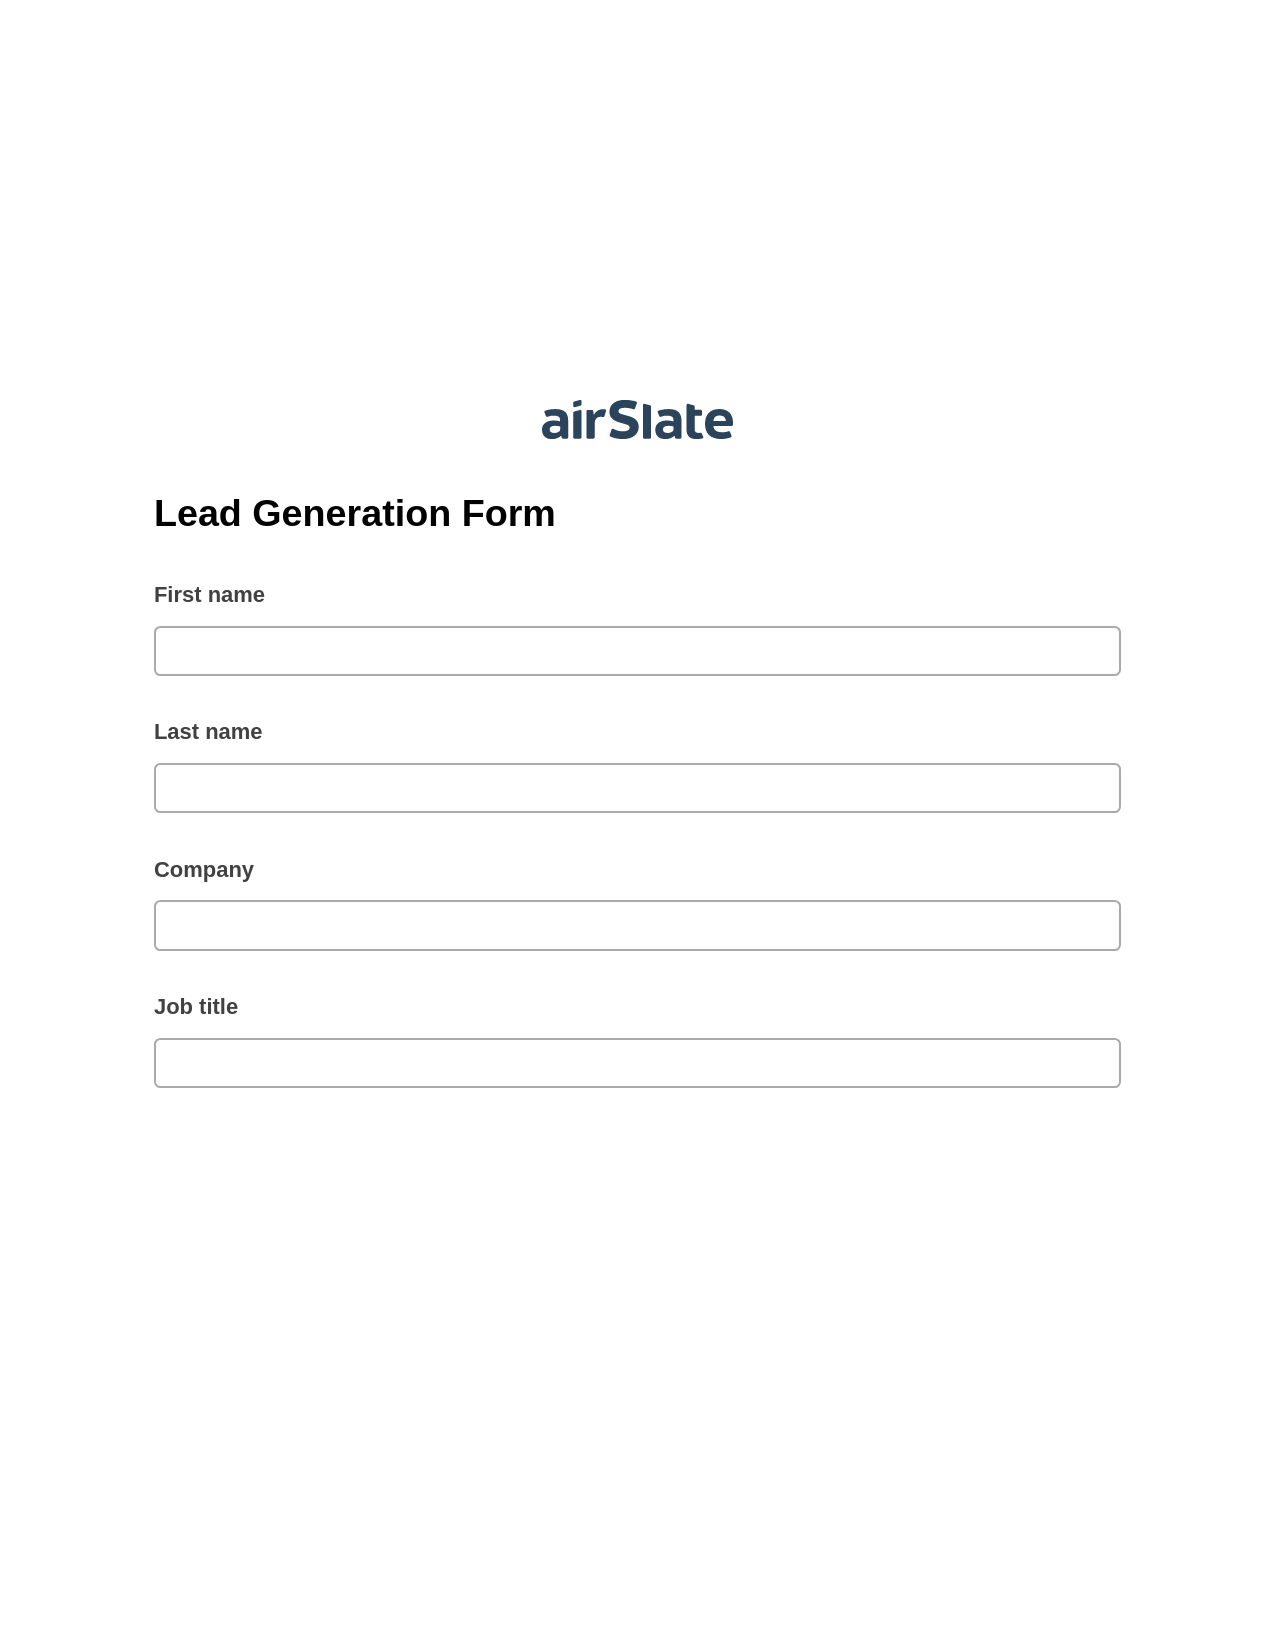 Lead Generation Form Pre-fill from Salesforce Records with SOQL Bot, Send a Slate to Salesforce Contact Bot, Archive to OneDrive Bot